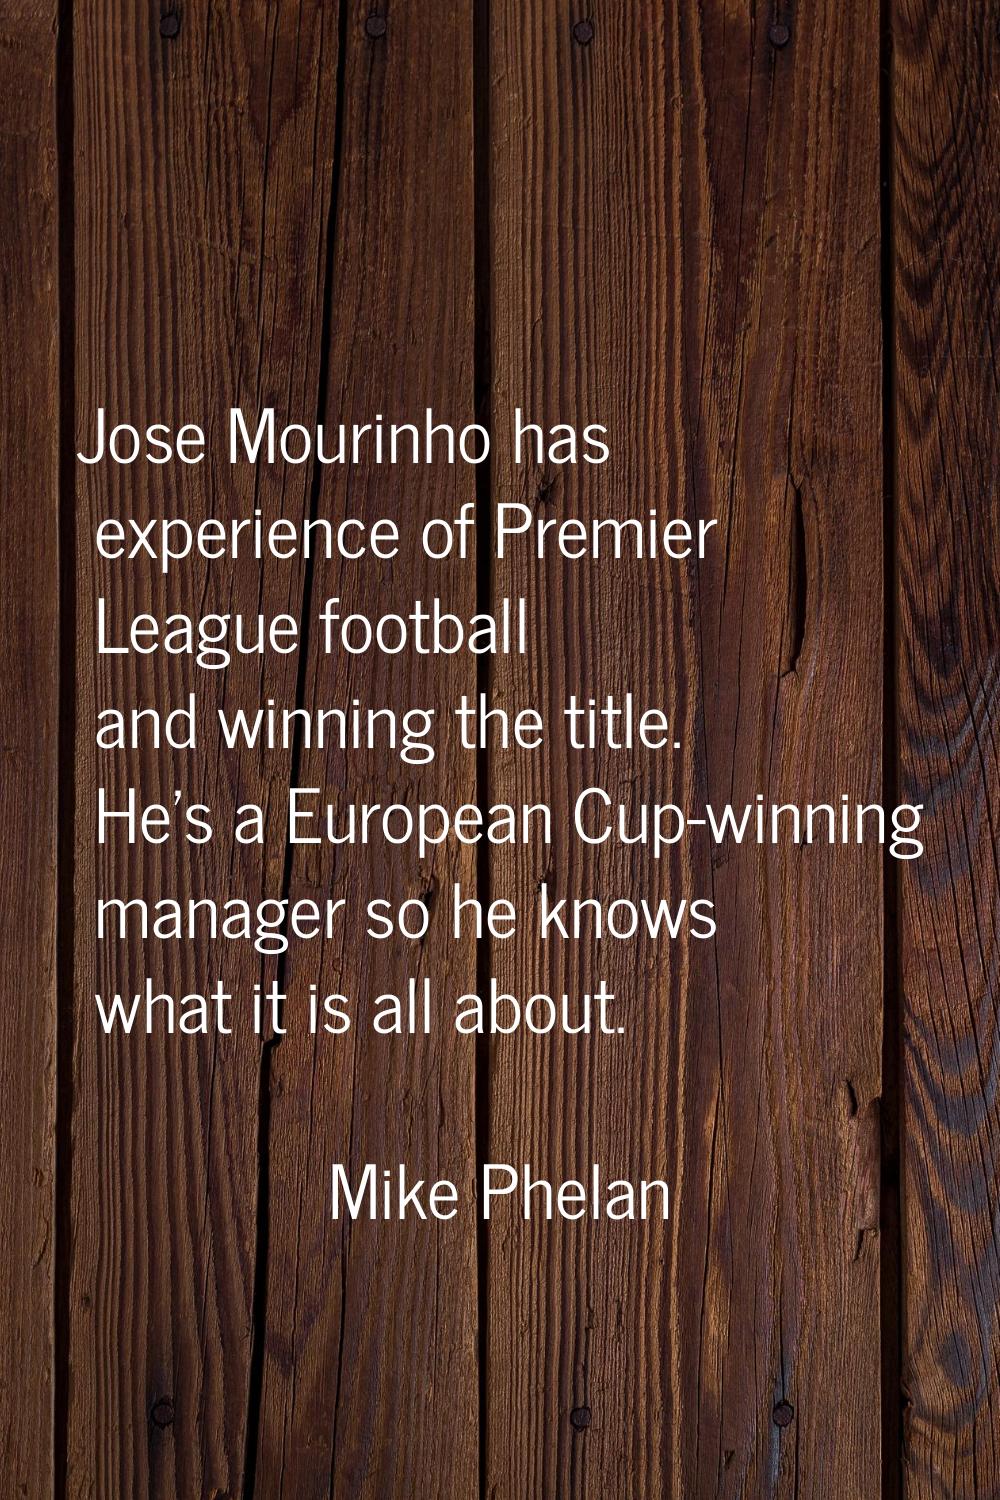 Jose Mourinho has experience of Premier League football and winning the title. He's a European Cup-